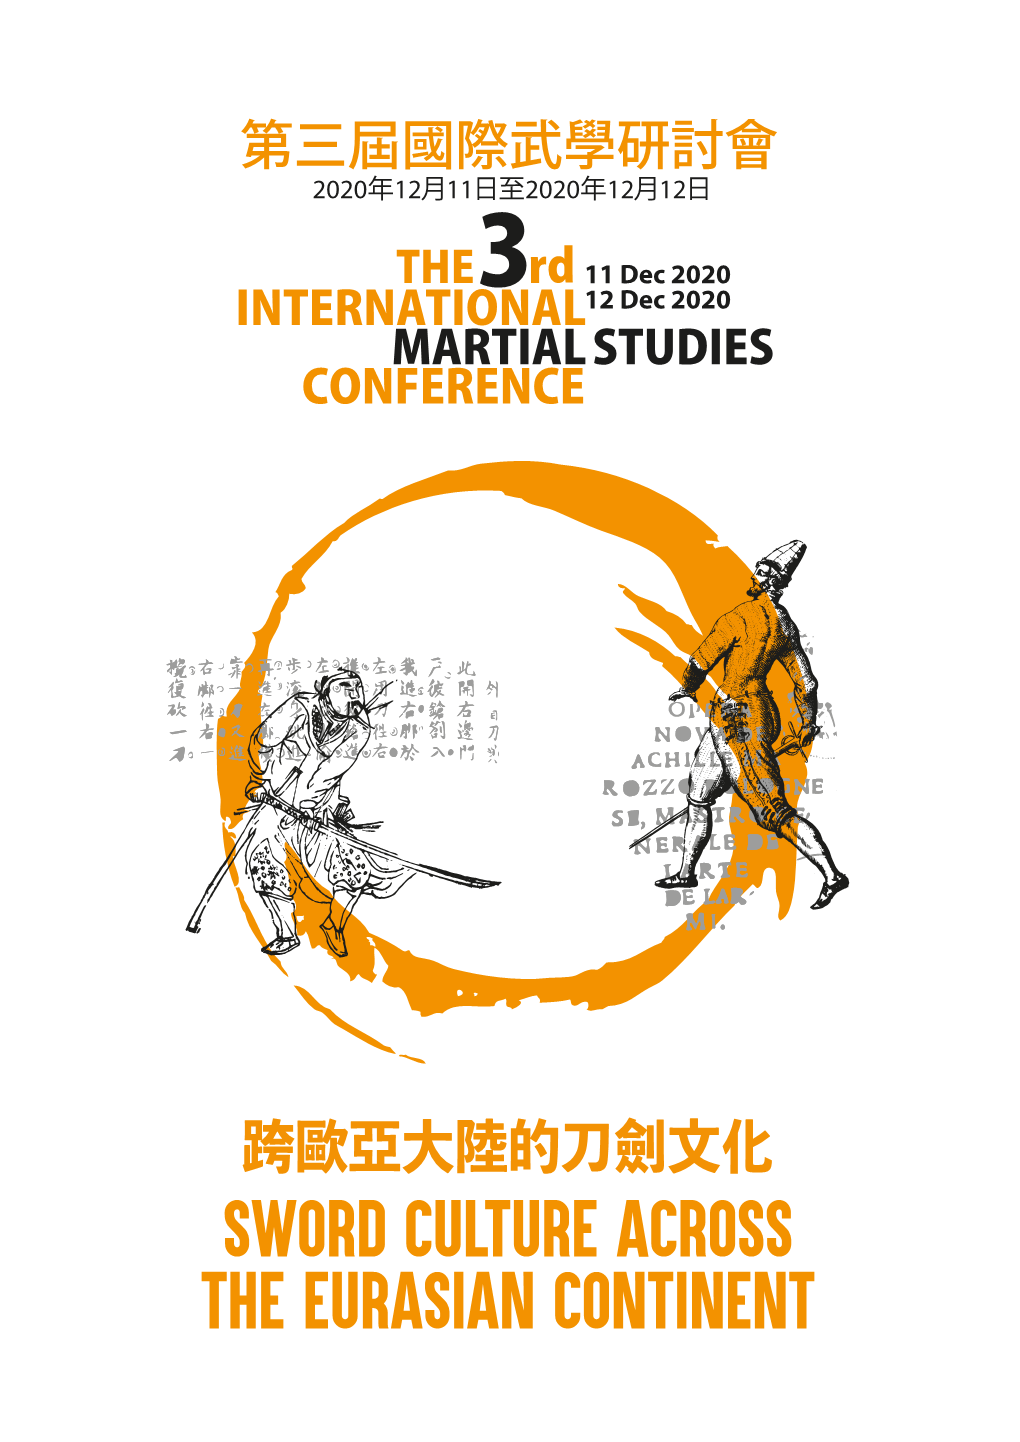 Sword Culture Across the Eurasian Continent Conference Martial Studies the 3Rd International